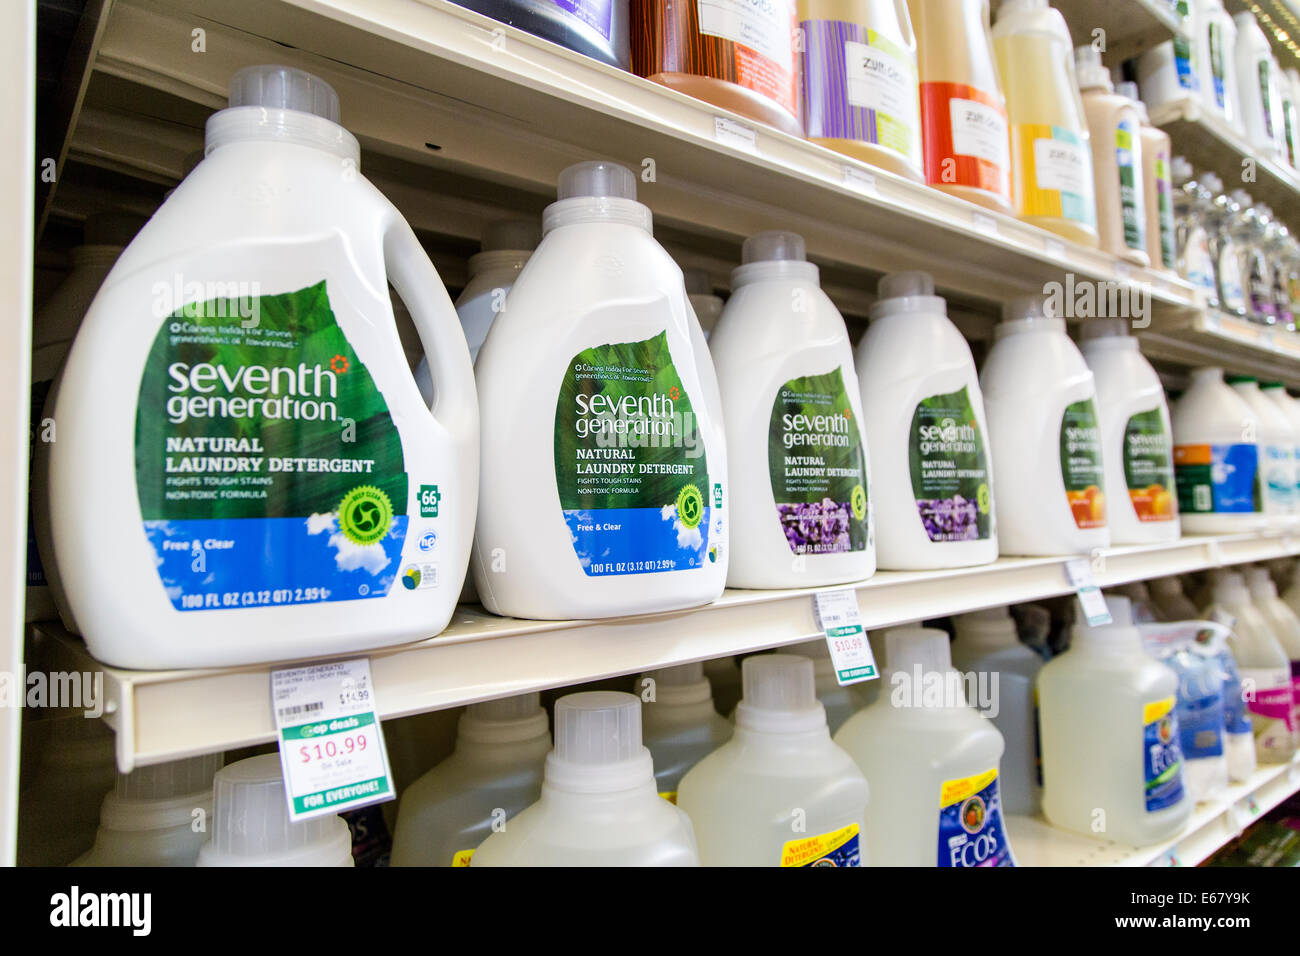 A display of Seventh Generation natural laundry detergent on the shelf of a natural food store. Stock Photo